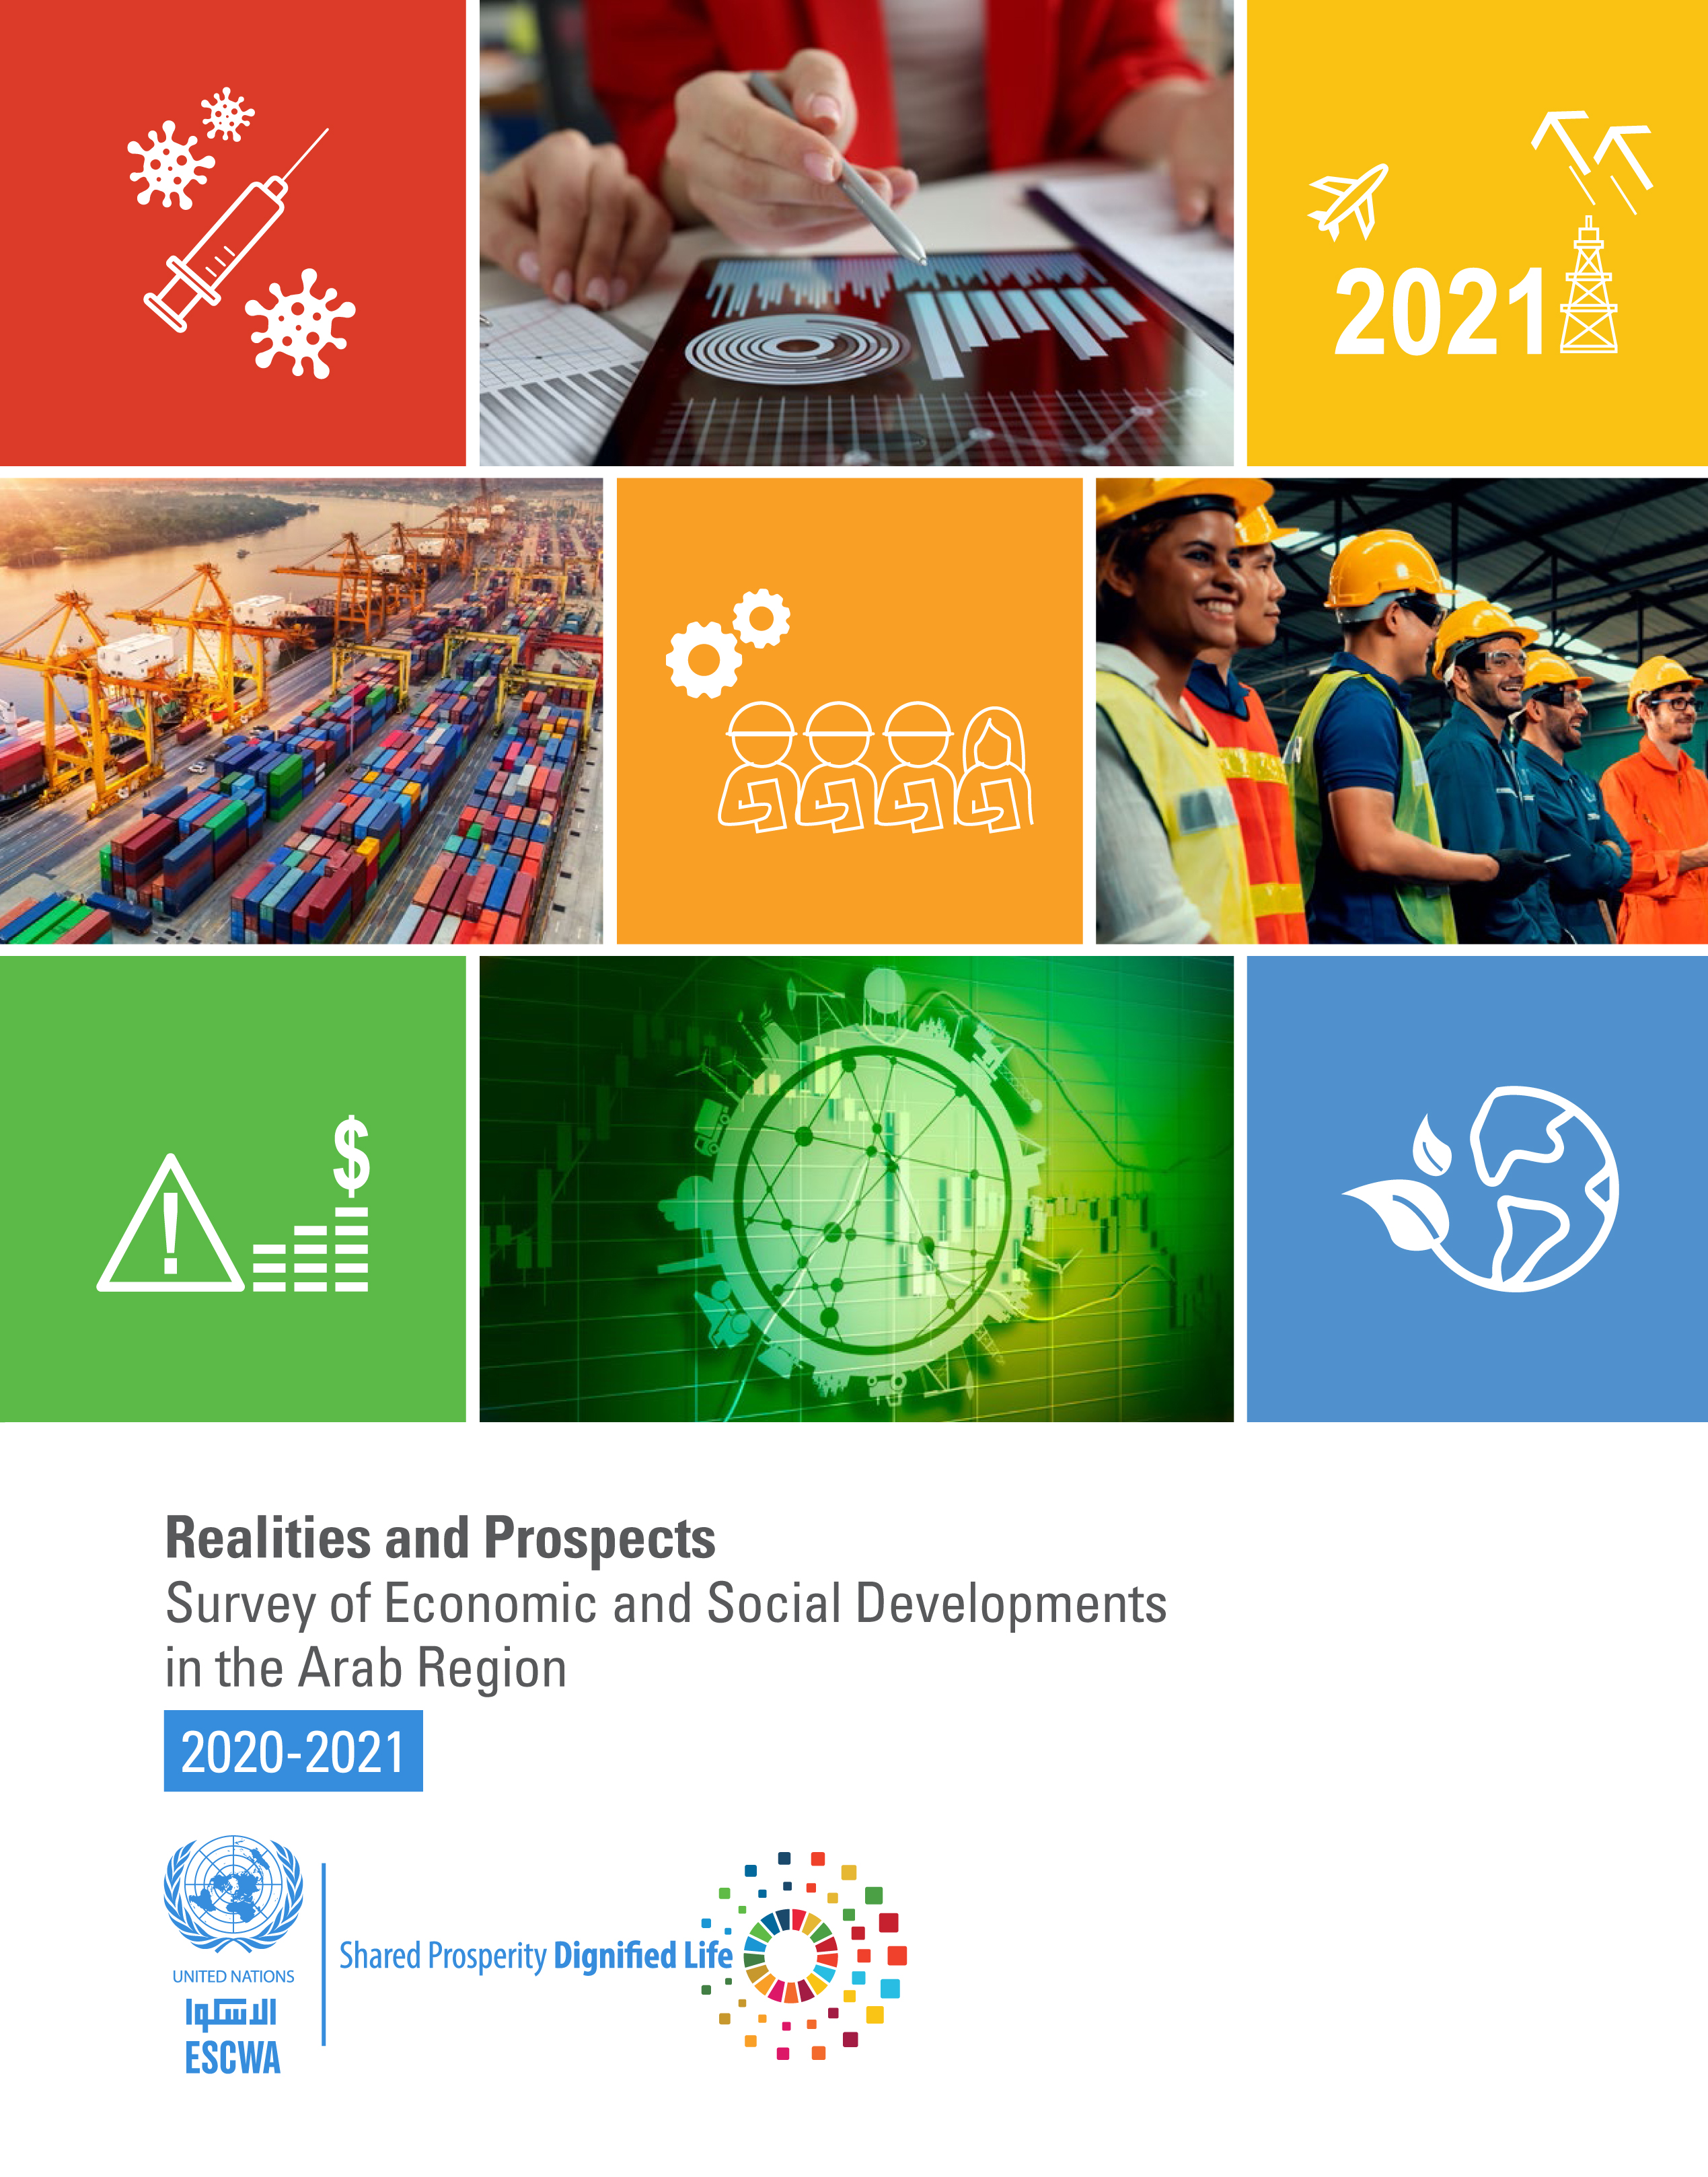 image of Survey of Economic and Social Developments in the Arab Region 2020-2021